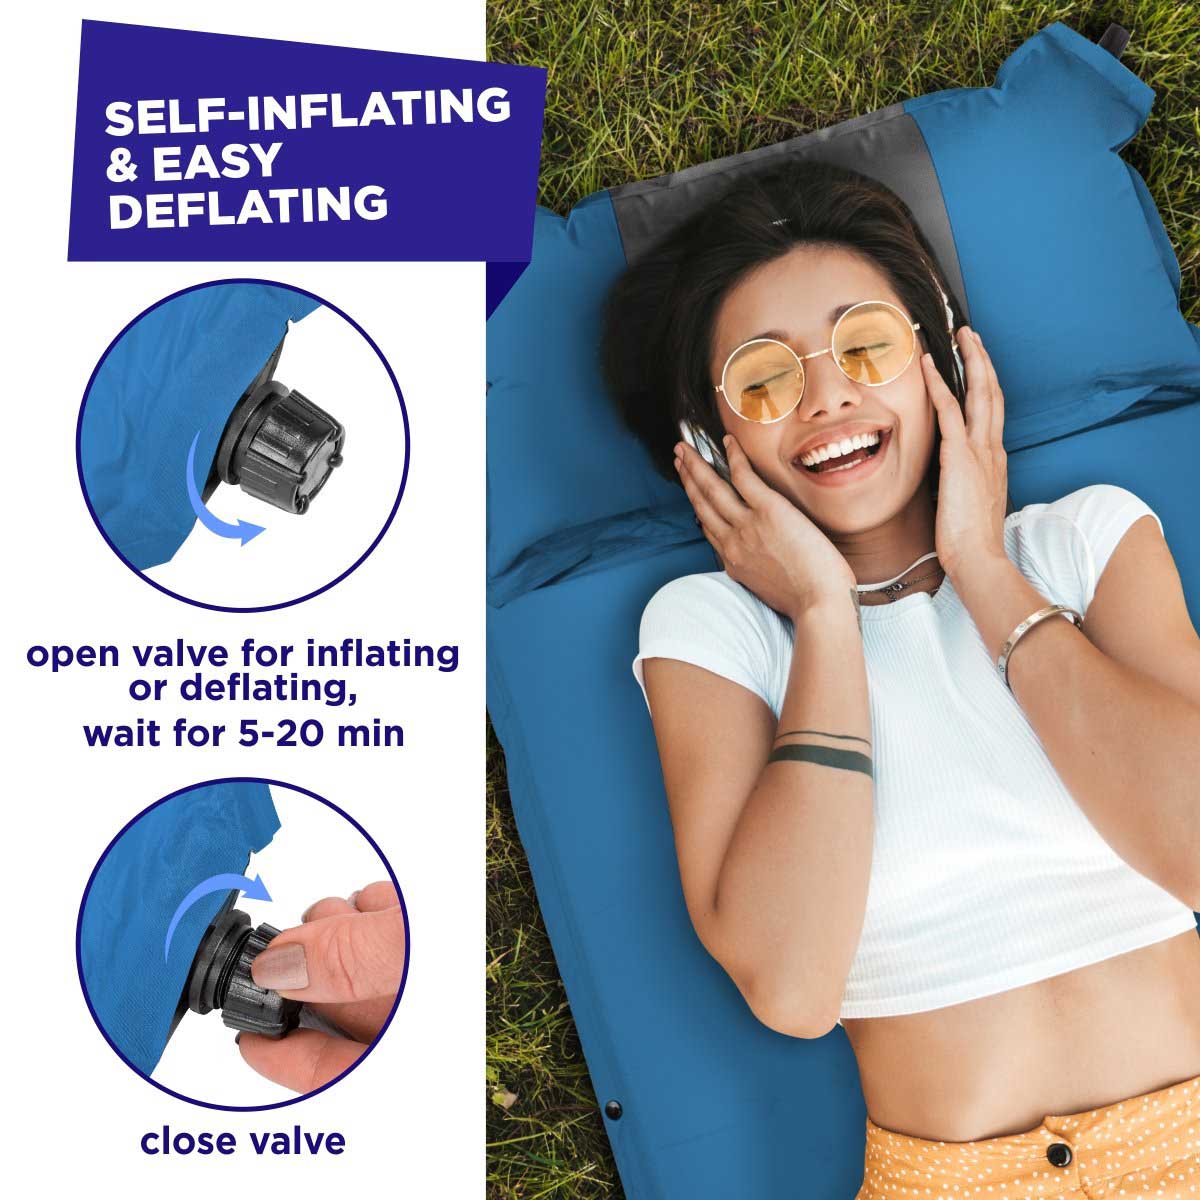 2-inch Lightweight Self Inflating Camping Sleeping Pad is easily inflating - just open the valve and close it after 5-20 minutes